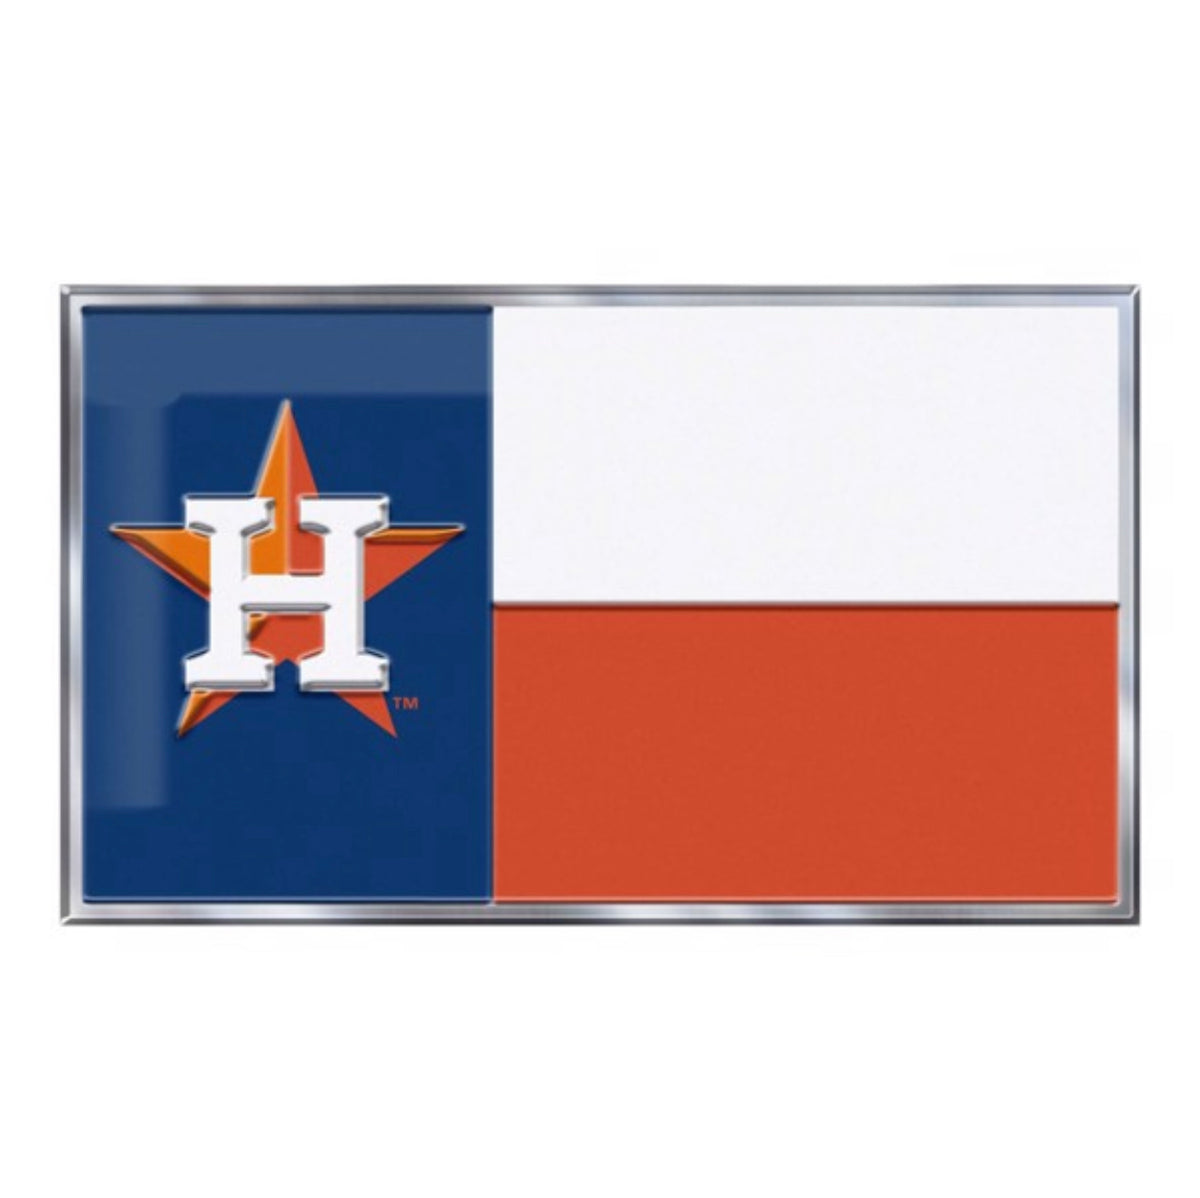 Houston Astros BE STRONG USA Flag Morale Patch